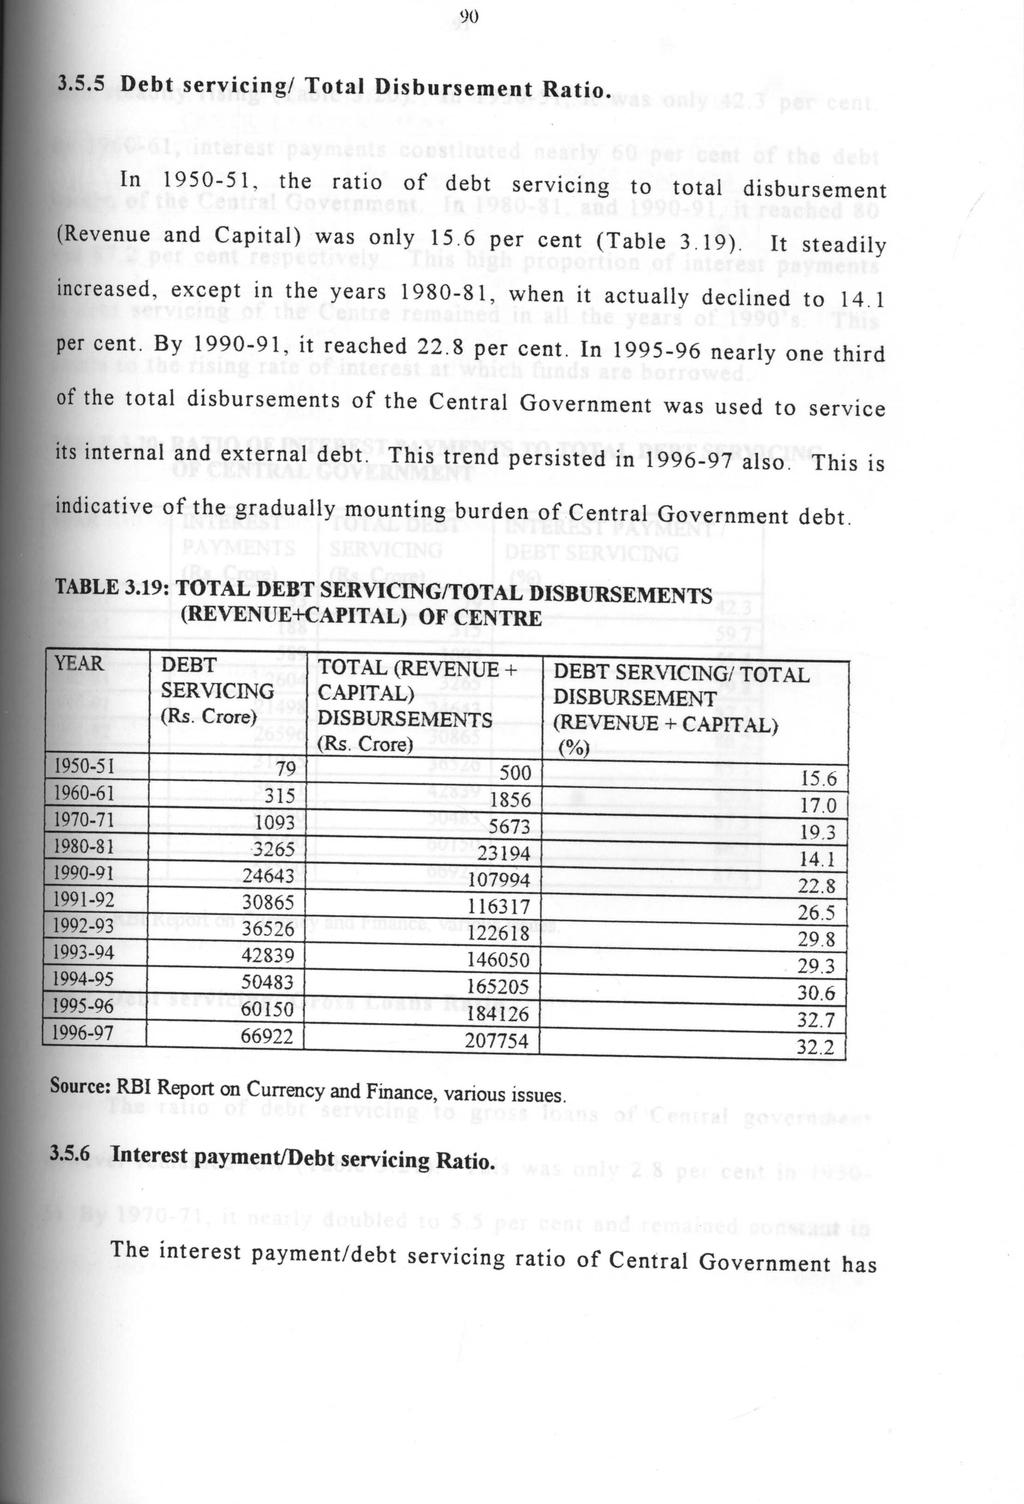 90 3.5.5 Debt servicing / Total Disbursement Ratio. In 1950-51, the ratio of debt servicing to total disbursement (Revenue and Capital) was only 15.6 per cent (Table 3.19).